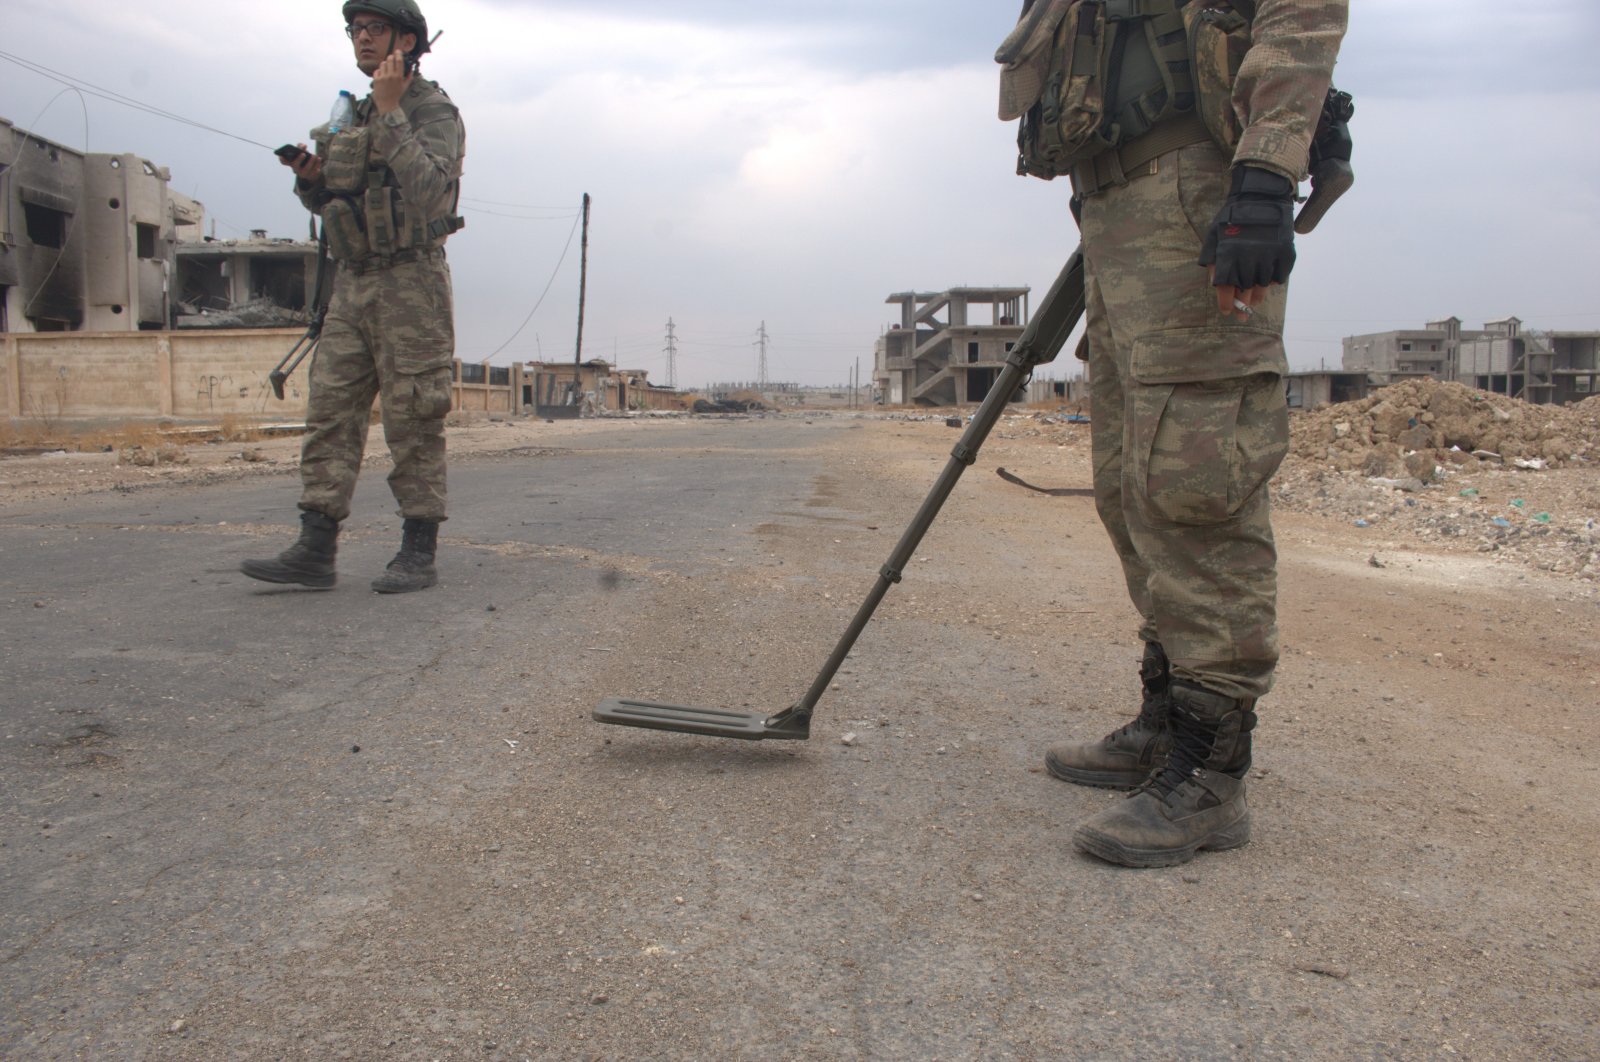 Turkish military's work is ongoing in liberated Syrian provinces to detect and destroy mines and other explosive devices planted by the terrorists. (IHA)

